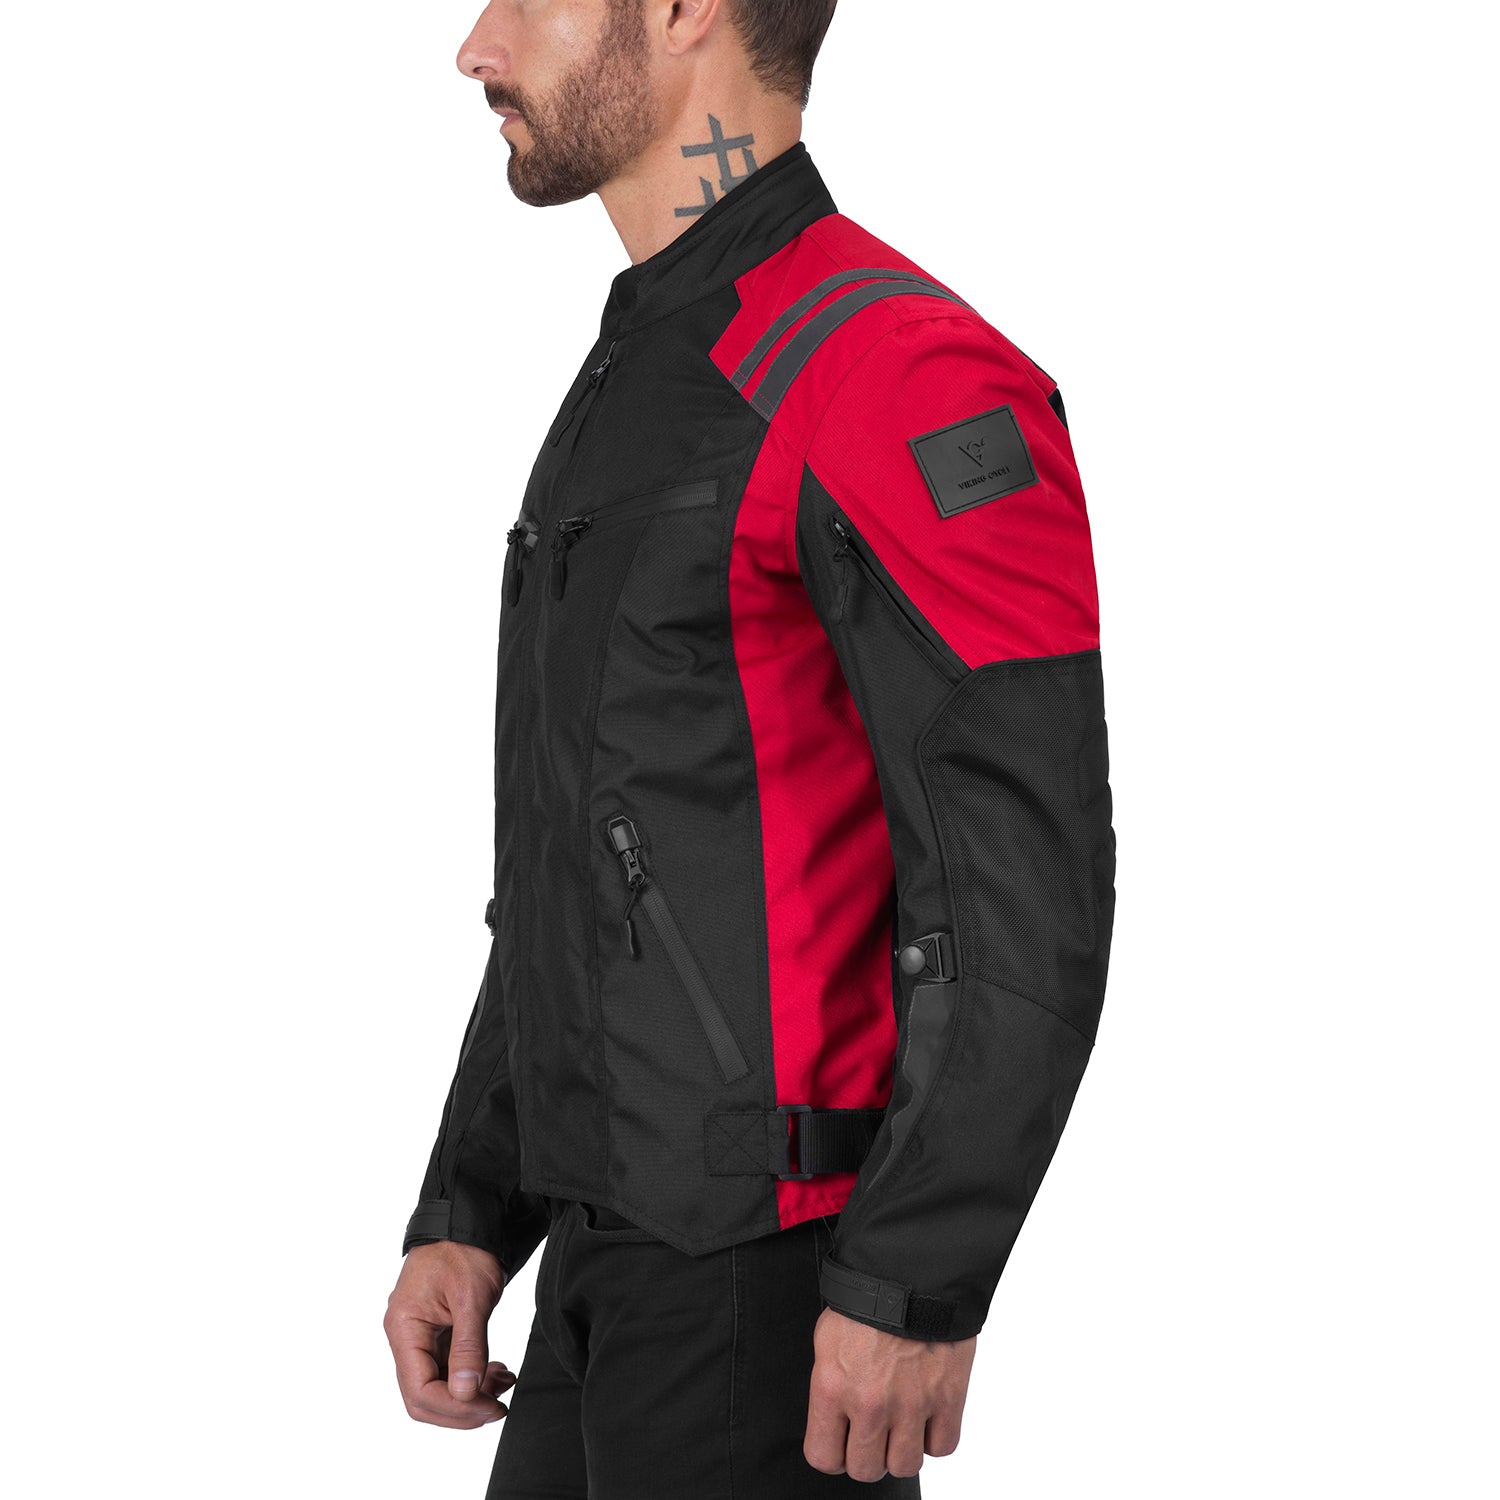 Red Vikingcycle Jacket Biker Textile Ironborn Quality Find Cycle – â€“ Viking